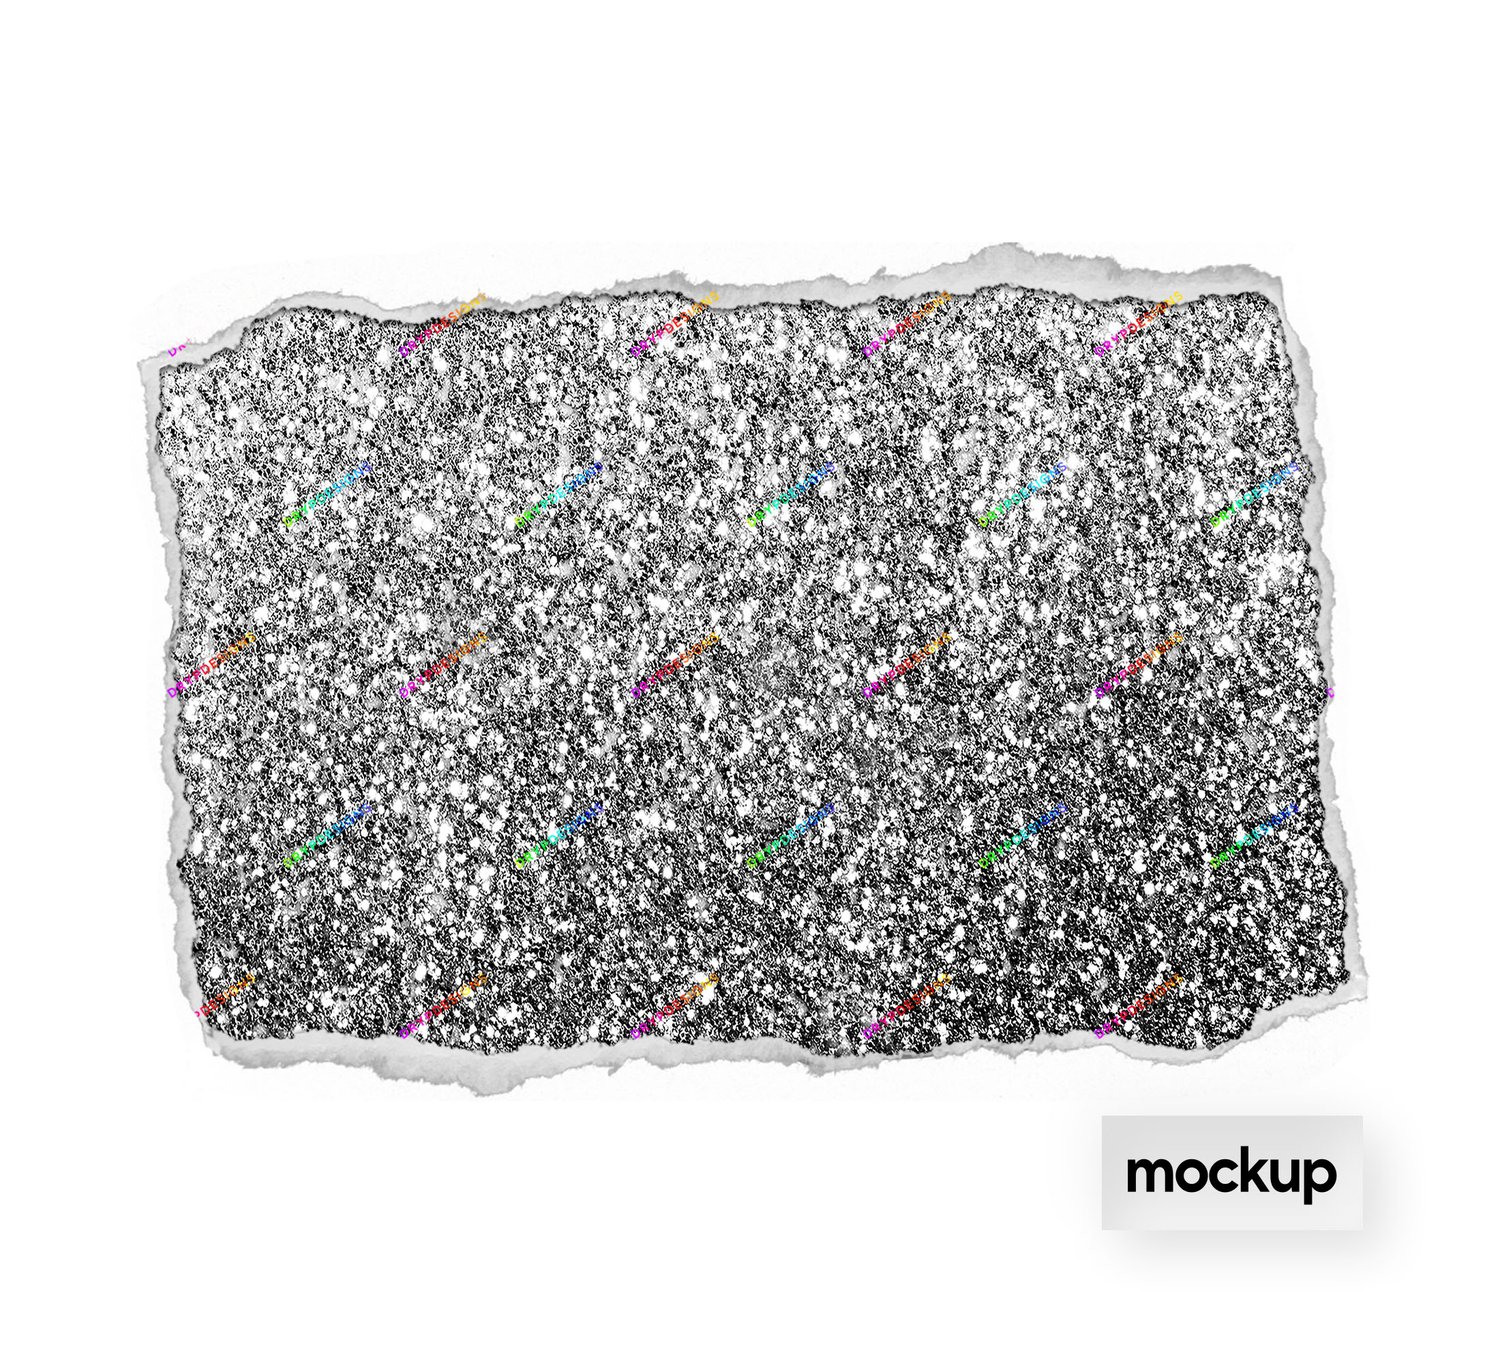 Silver glitter paper background Stock Photo by ©karenr 250288136